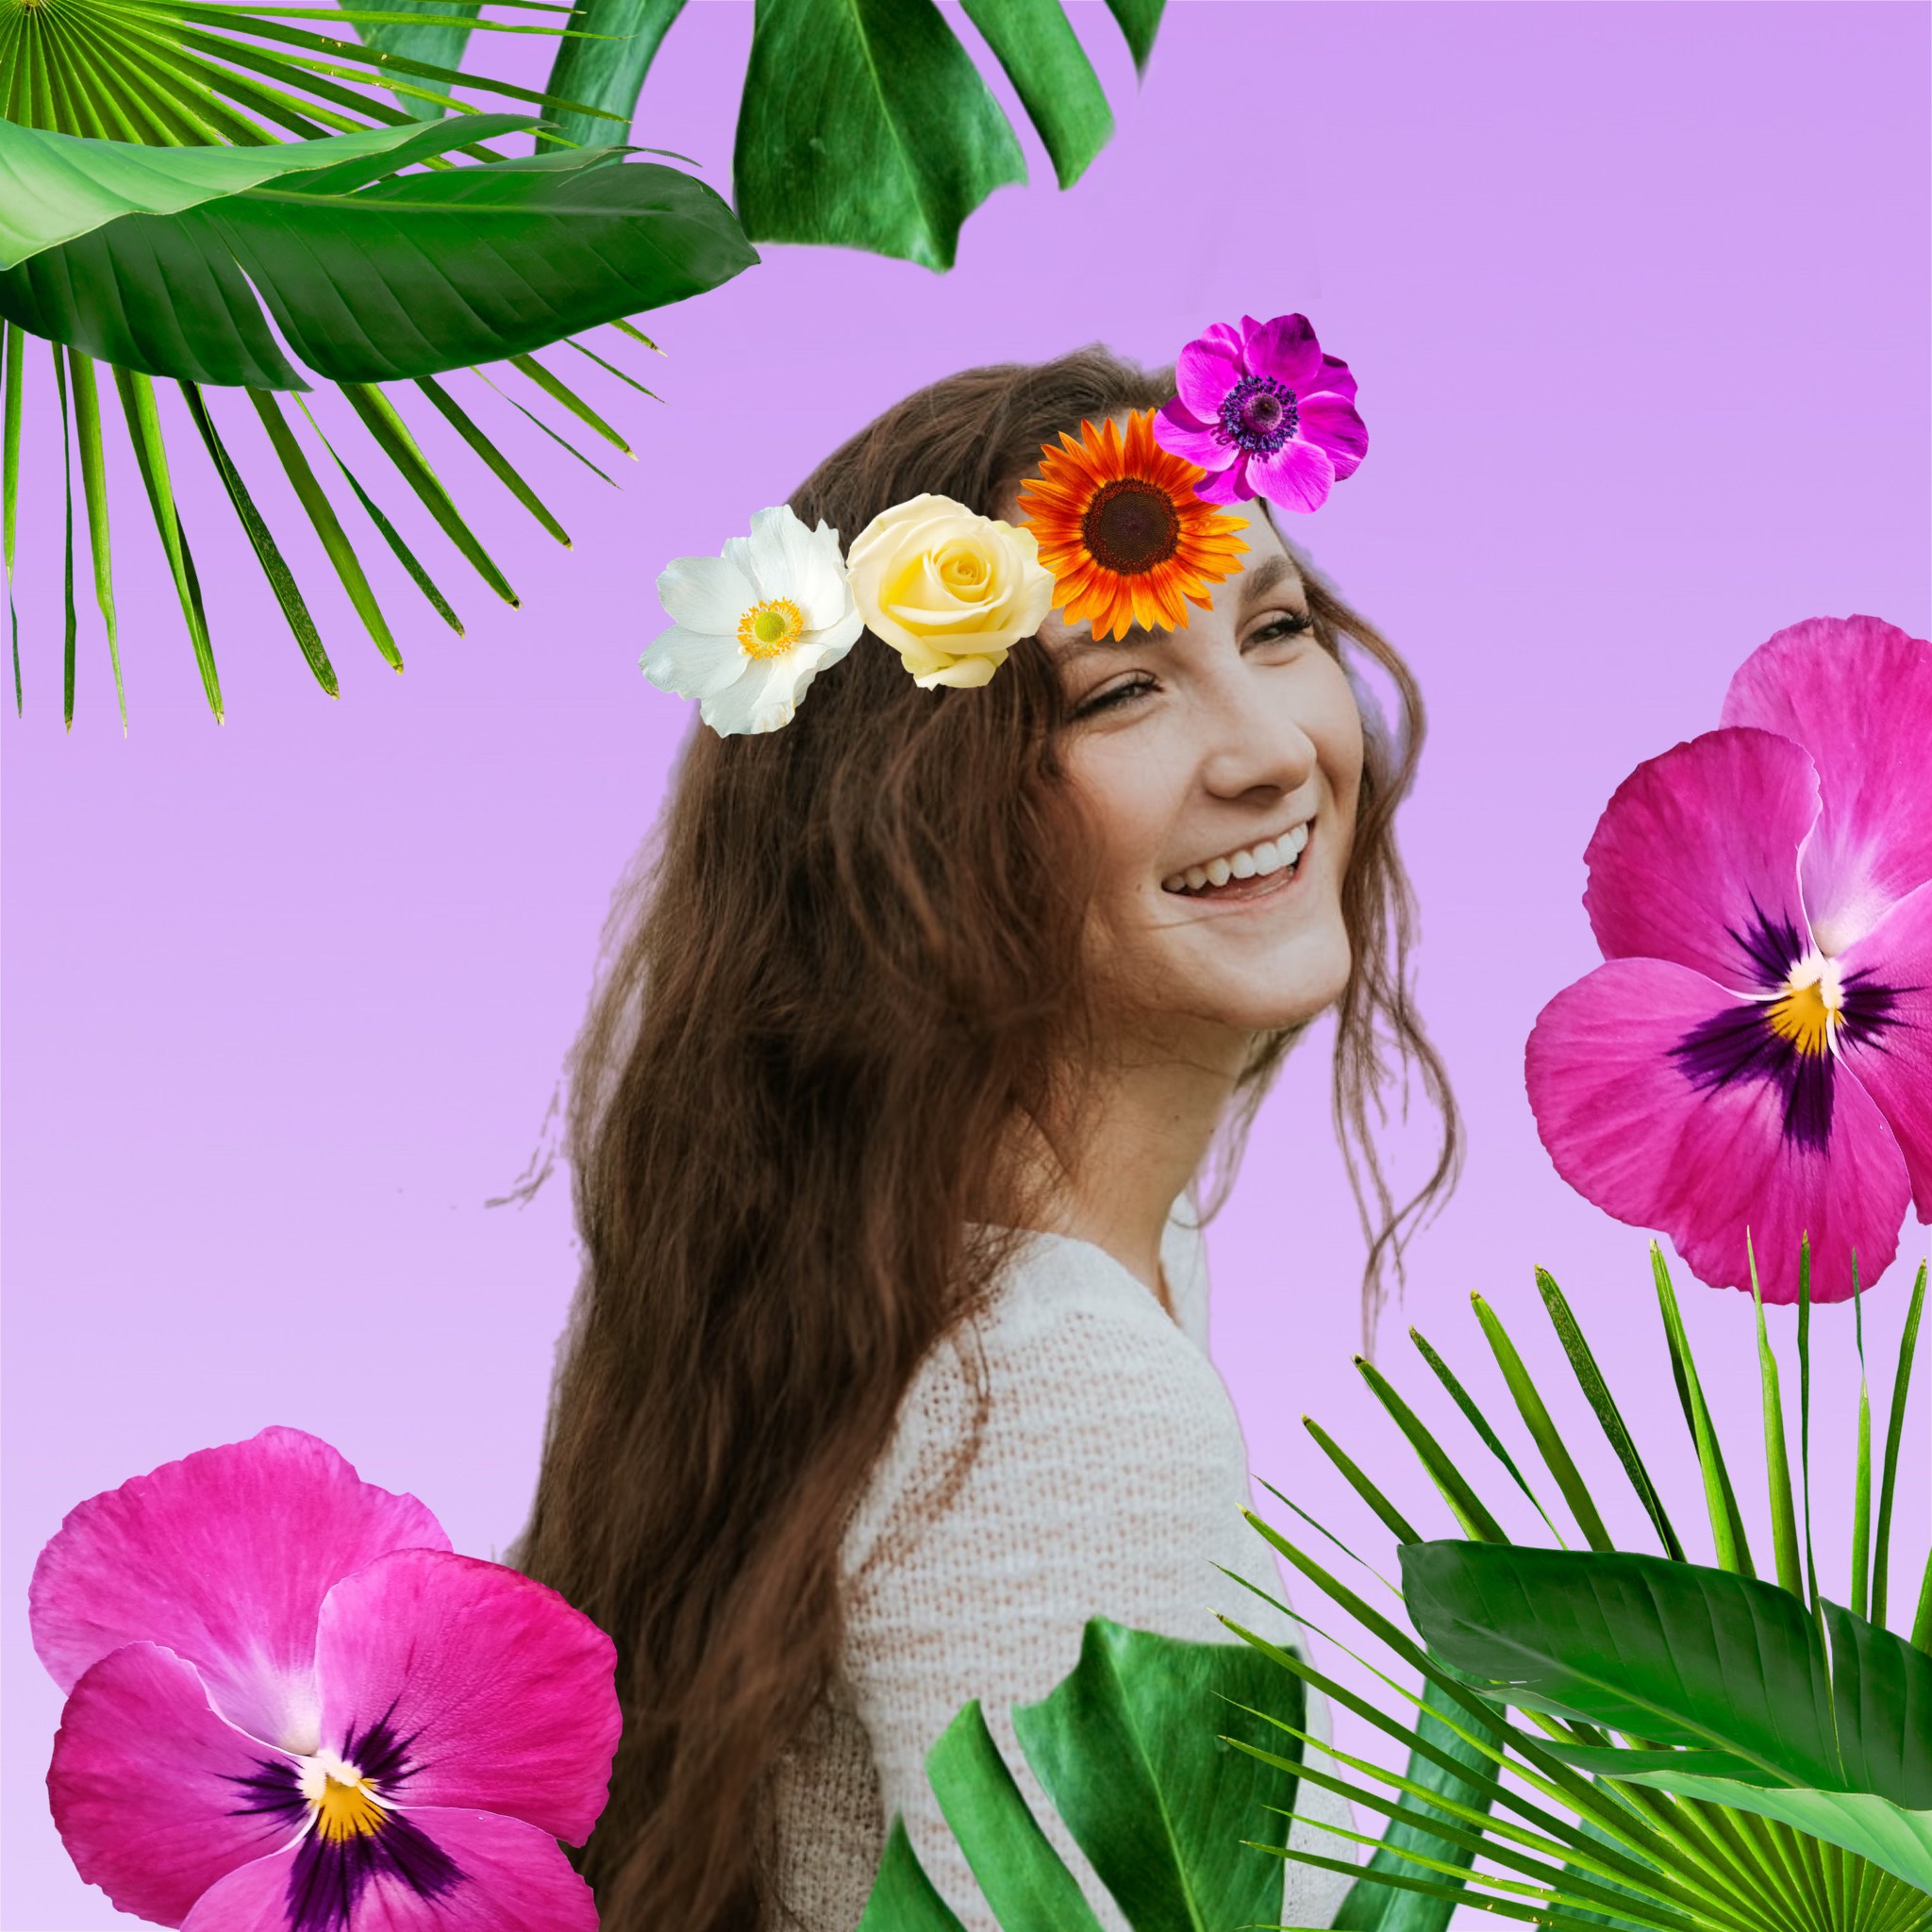 A Woman With flowers On Her Head Magic Profile Pics Template